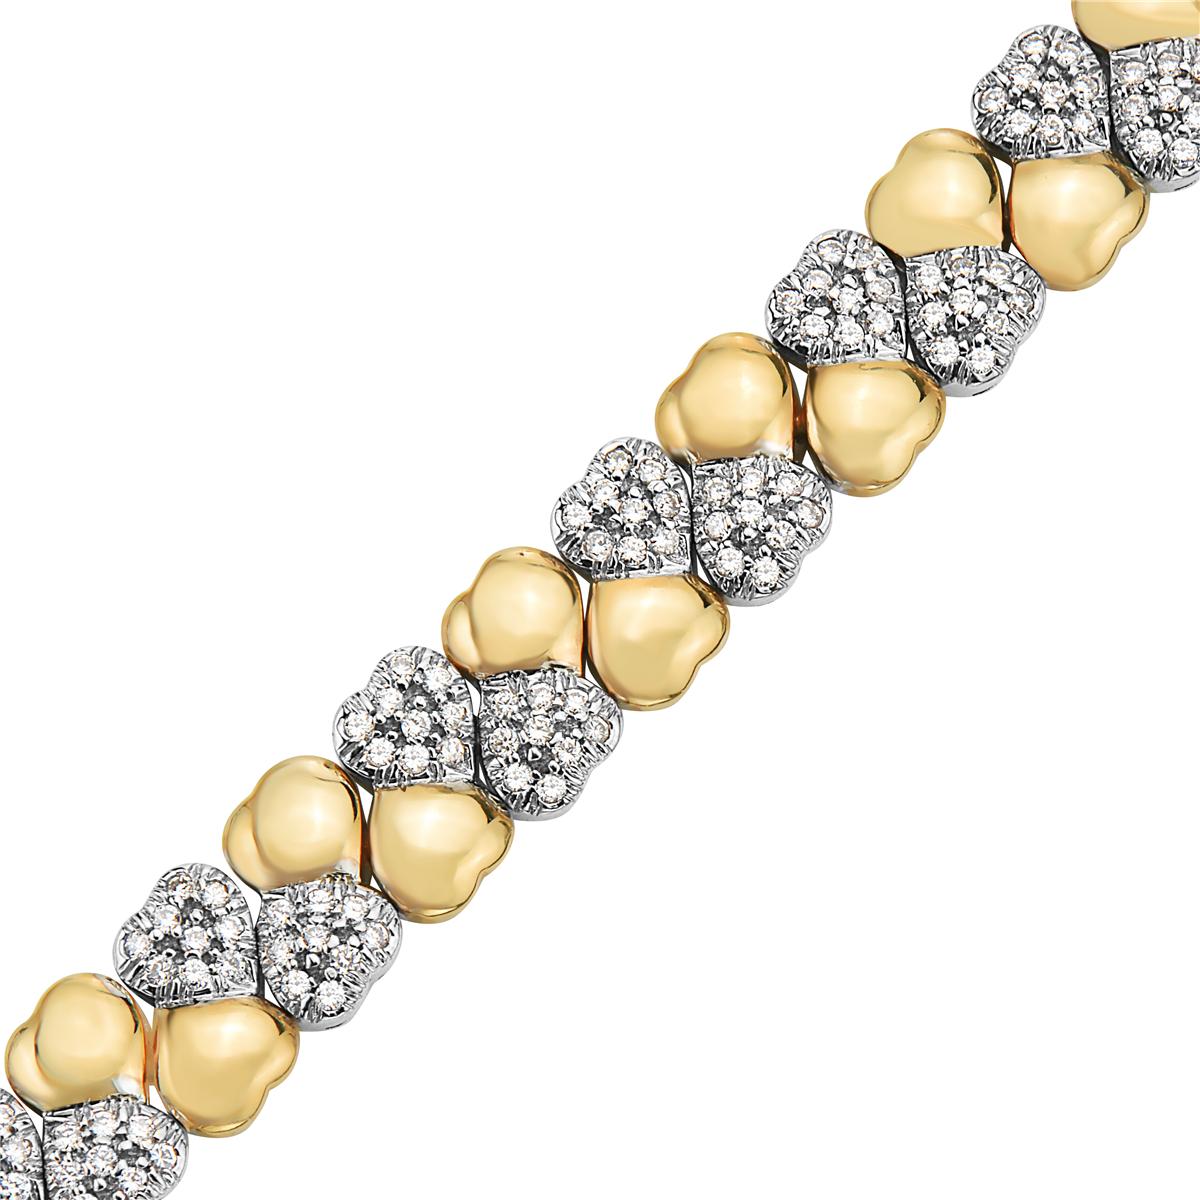 This bracelet features two carats of diamonds set in 14K yellow gold. 6.5 inch. 26.8 grams total weight. 


Viewings available in our NYC showroom by appointment.